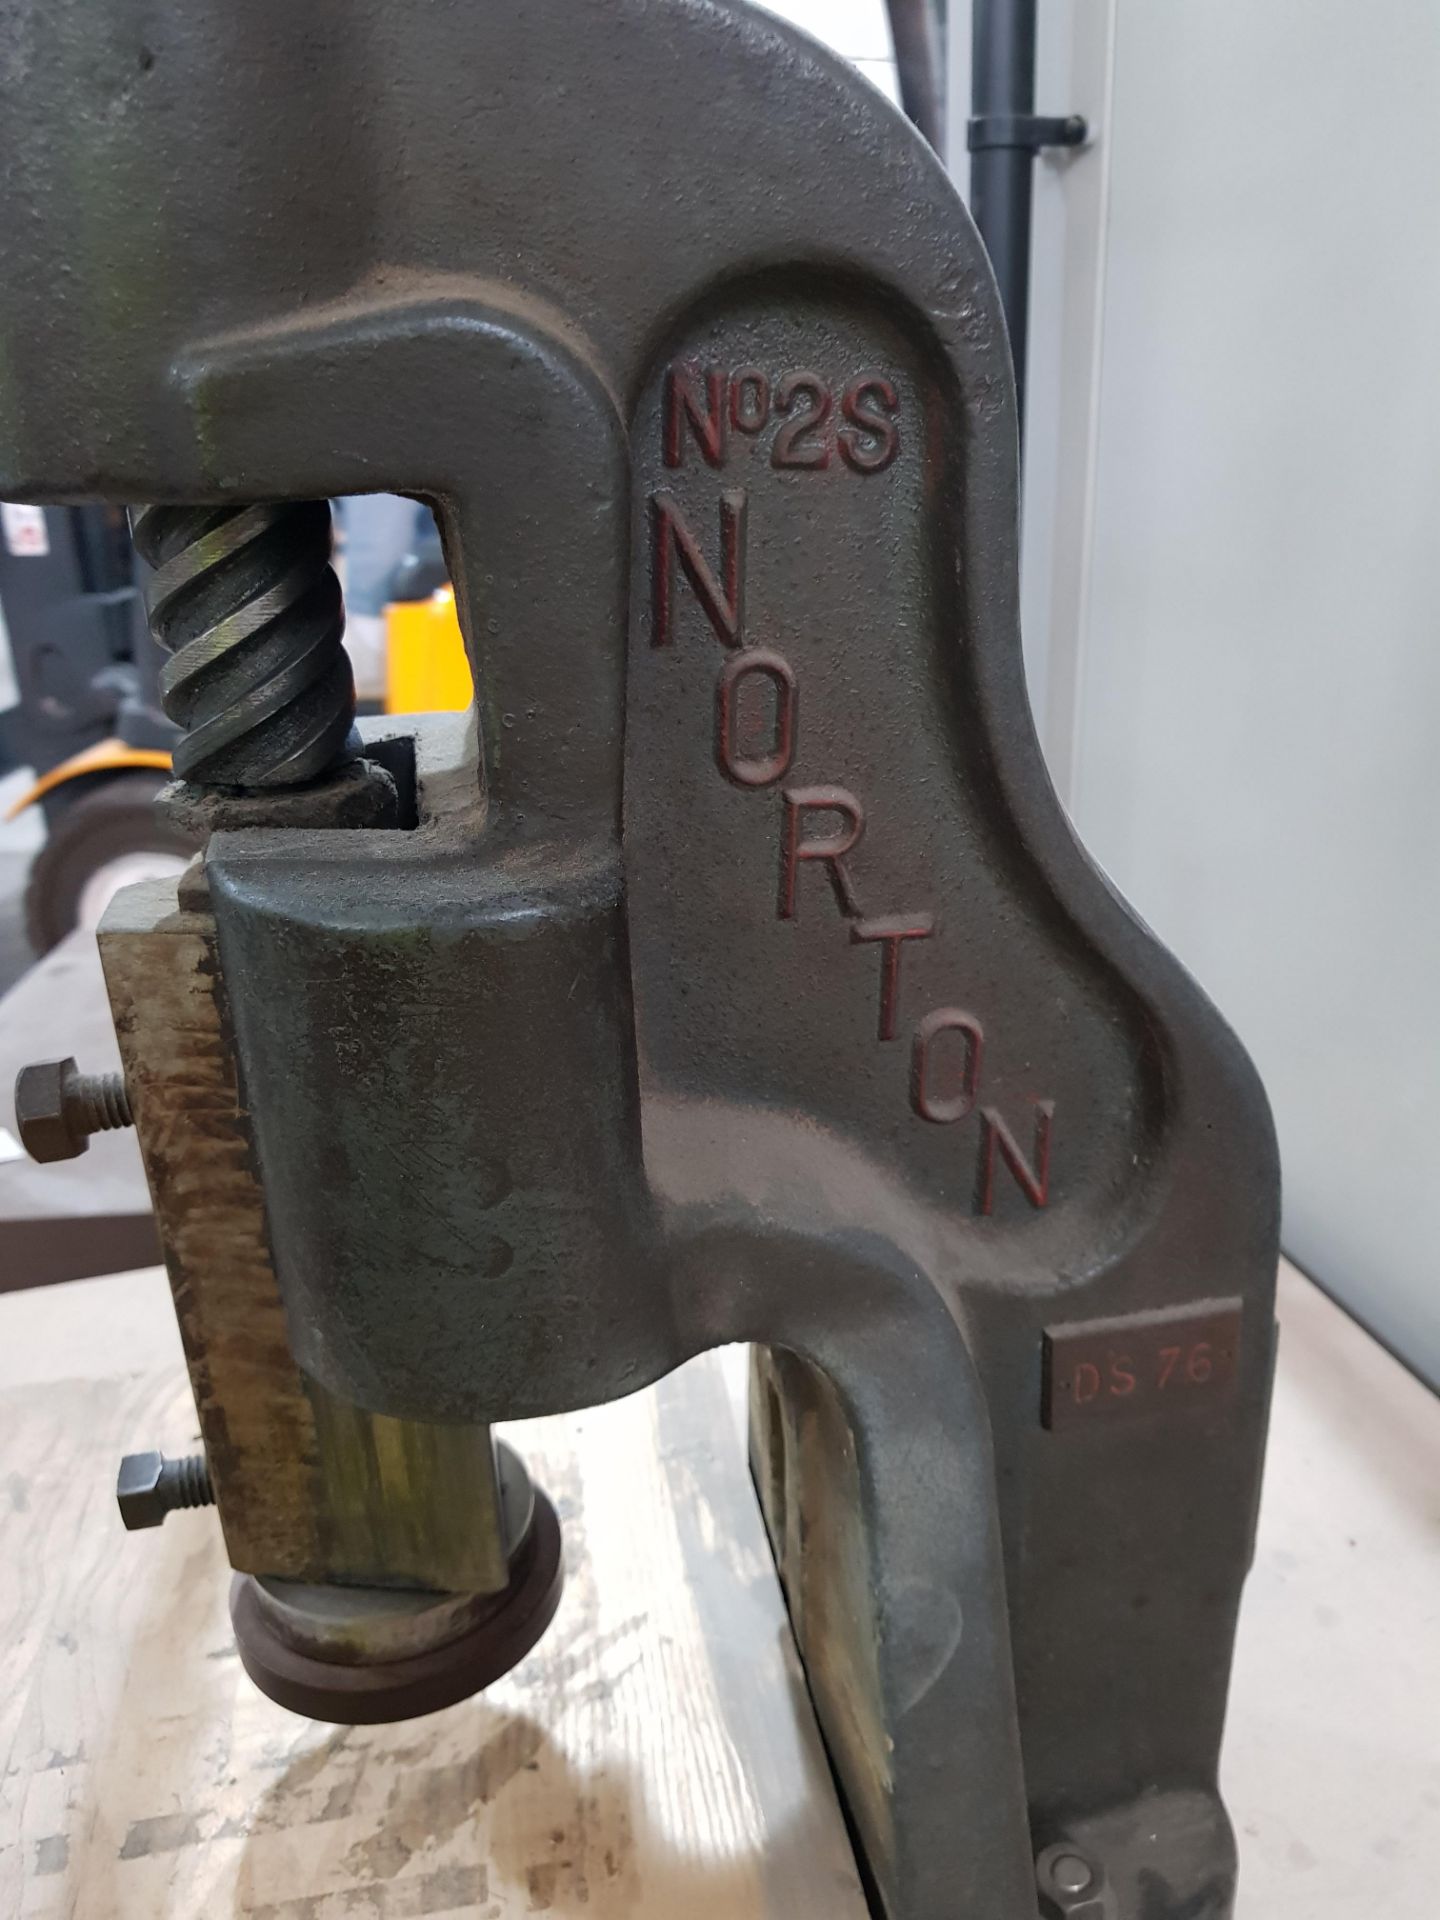 1 X NORTON NO 25 D576 MANUAL STEEL PRESS. (ASSETS LOCATED IN DENTON, MANCHESTER. VIEWING STRICTLY BY - Image 2 of 2